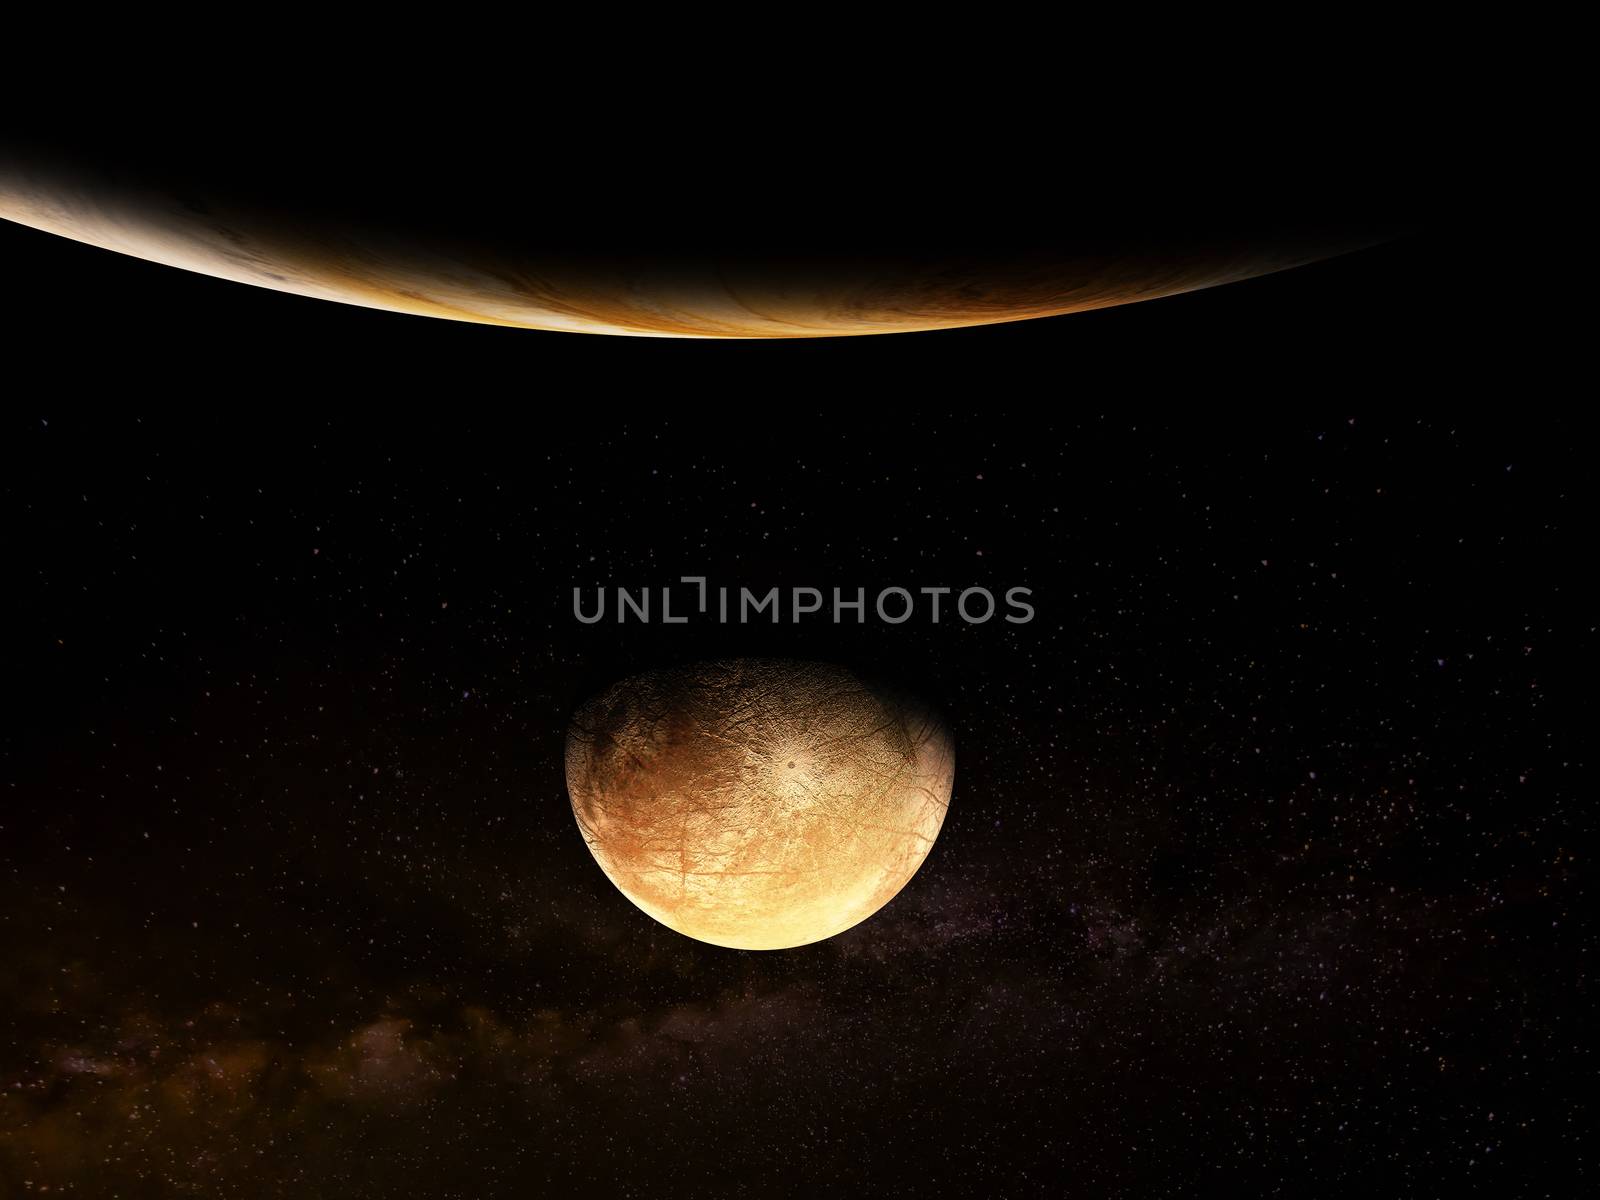 3D Rendering of Jupiter moon Europe - High resolution image by tussik